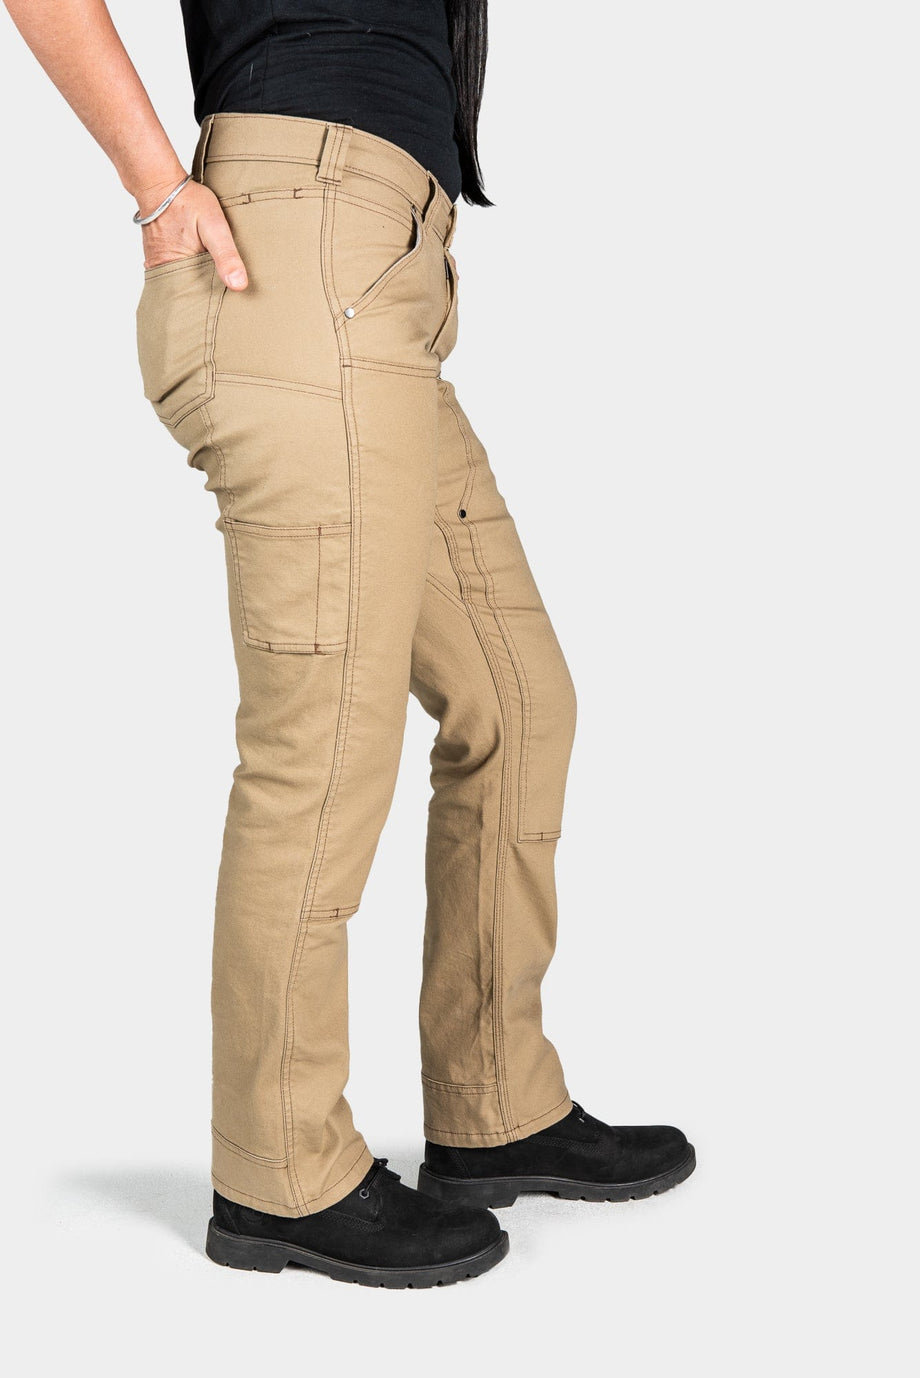 Dovetail Workwear Women's Dark Brown Canvas Work Pants (4 X 32) in the Work  Pants department at